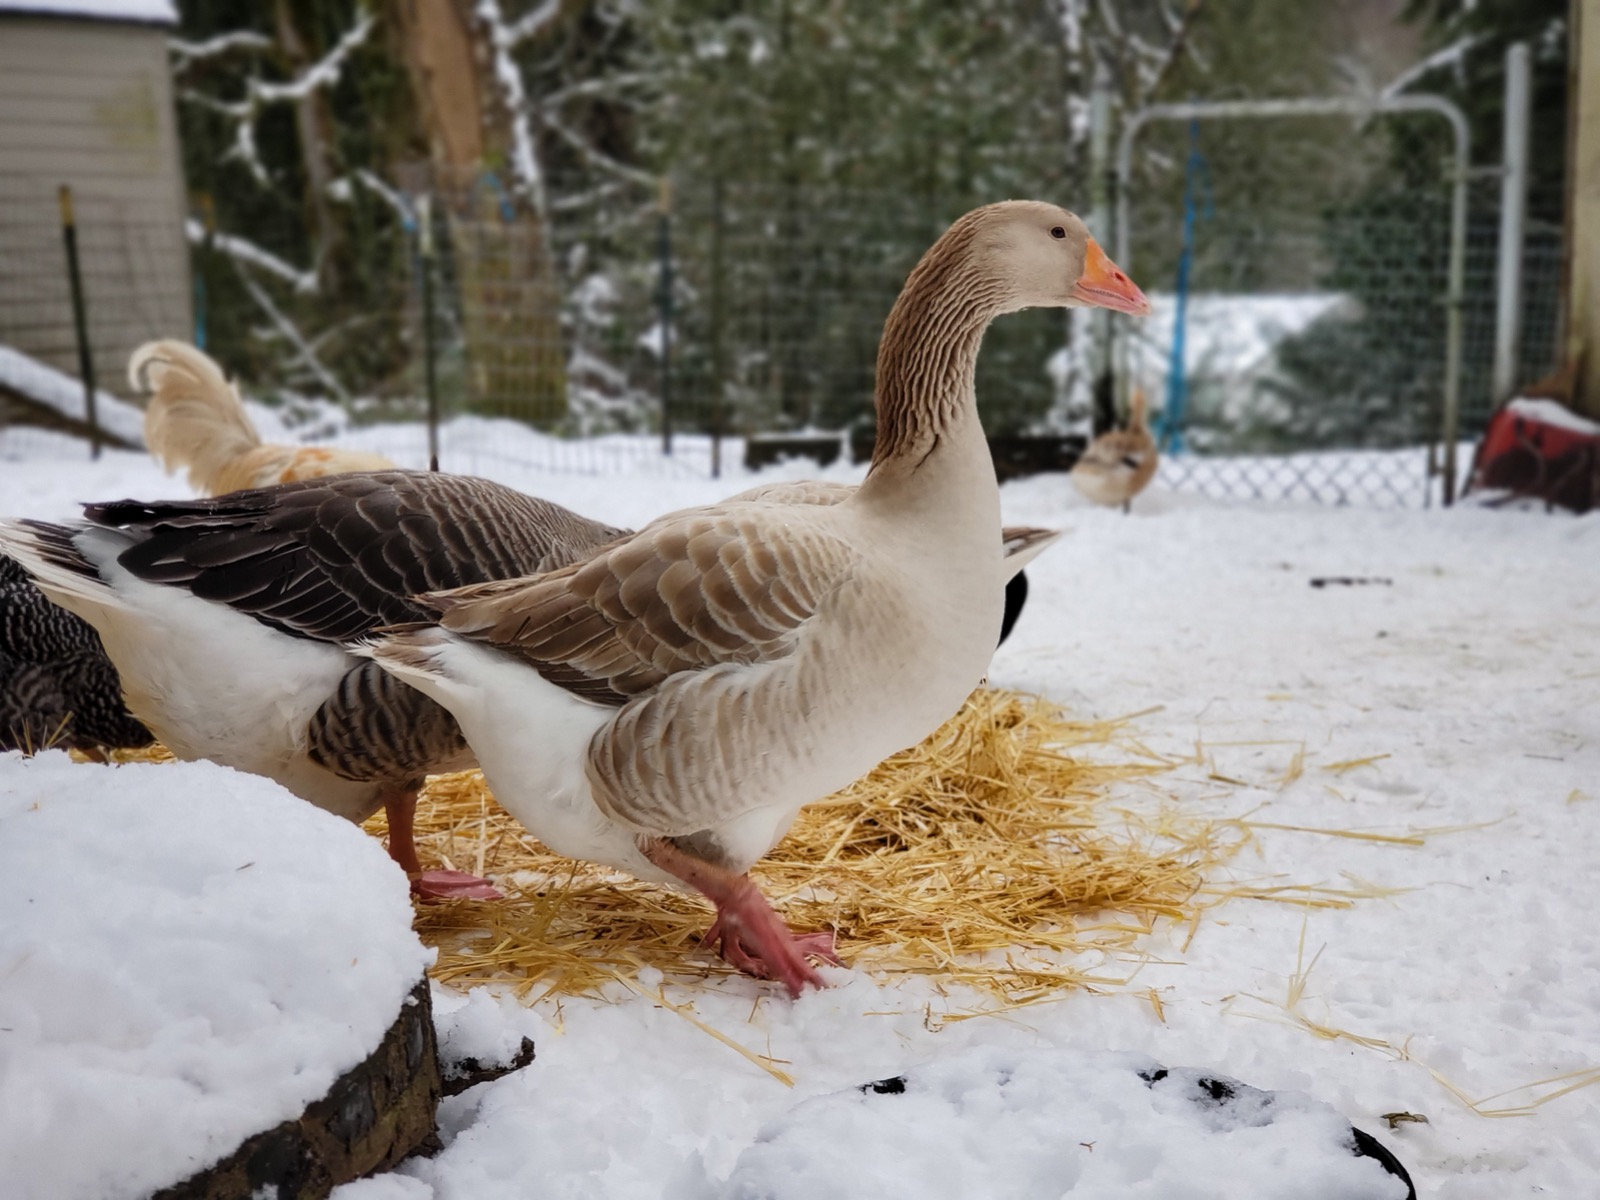 McMurray Hatchery Blog | Raising Geese as a Sustainable Protein